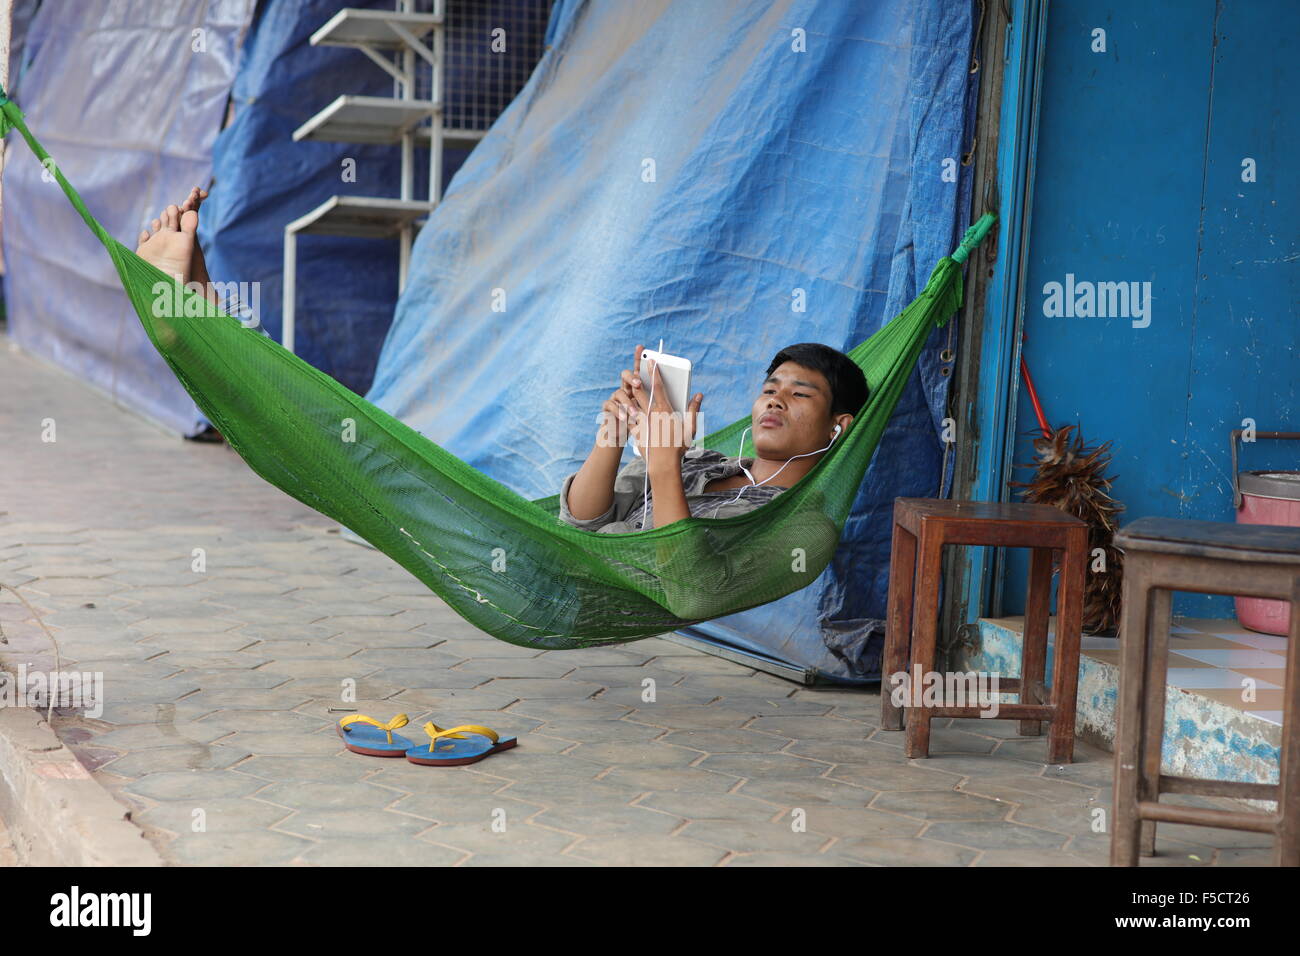 Man with smart phone in Hammock Banque D'Images